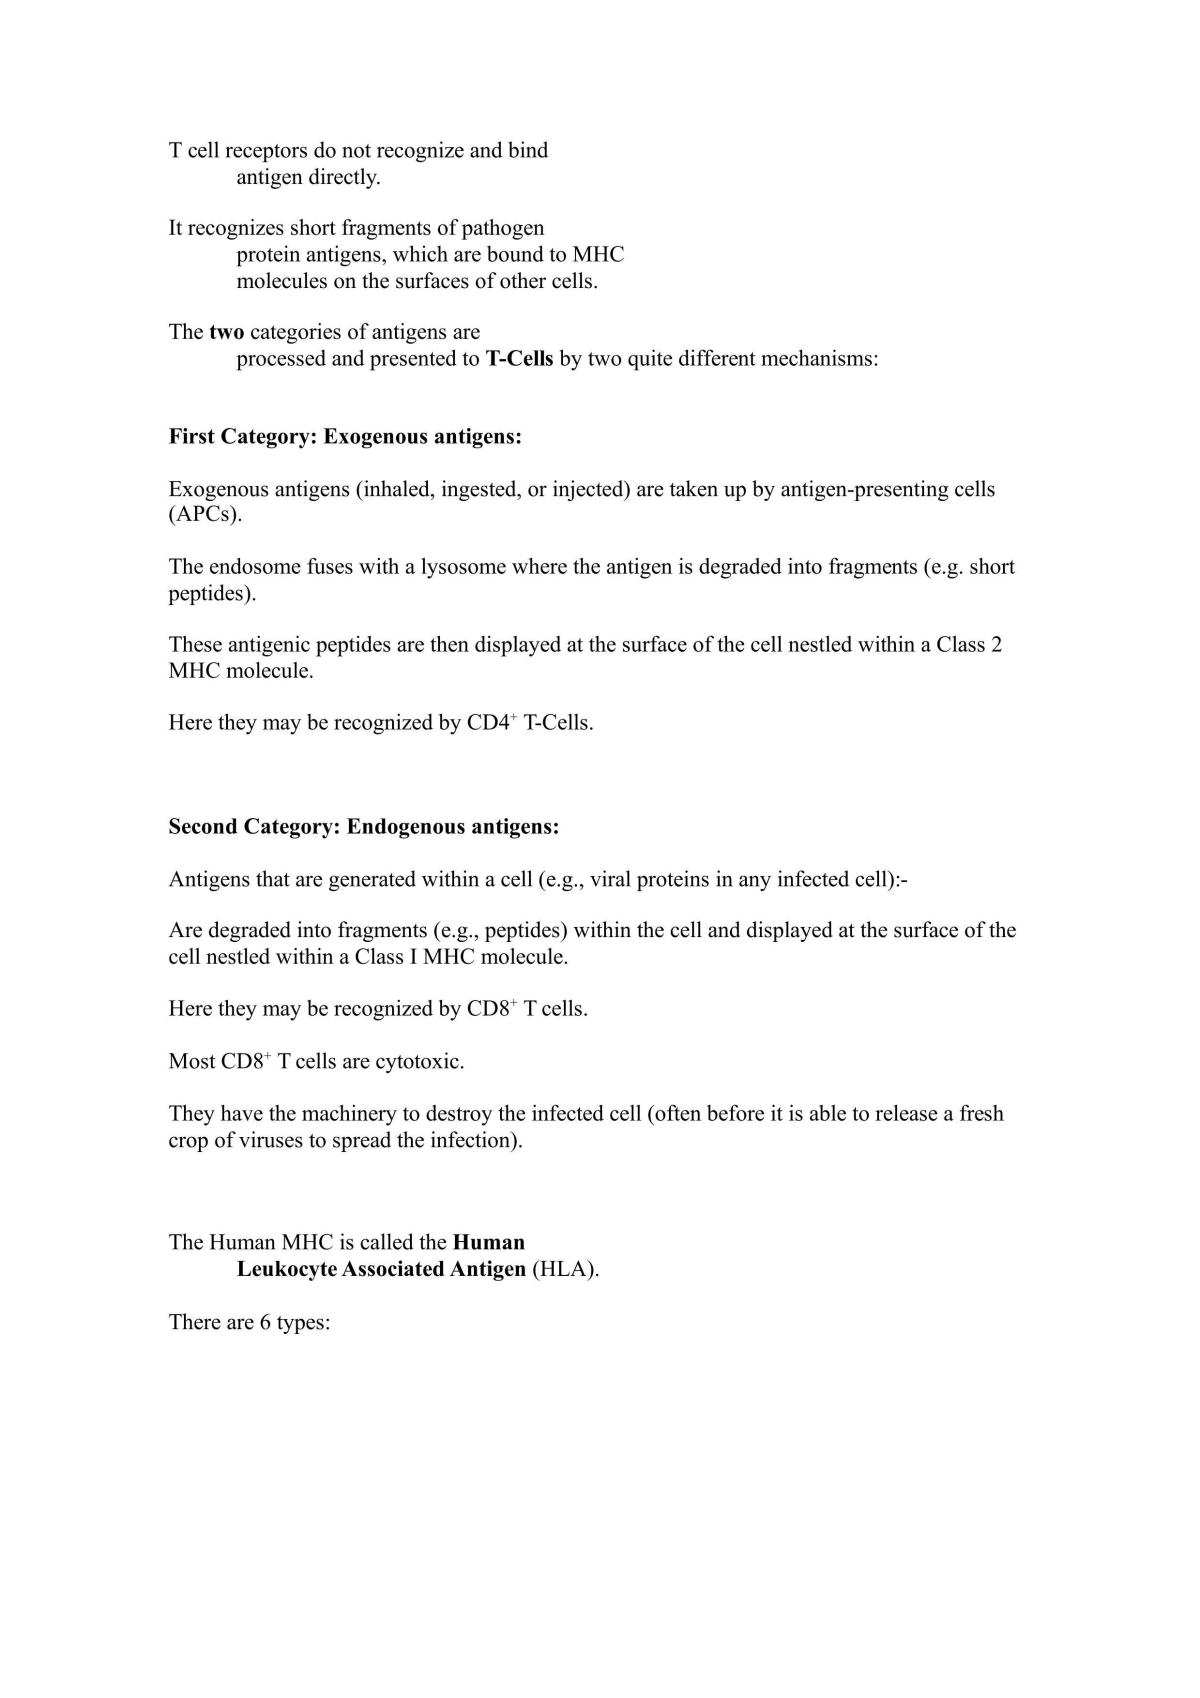 Immunology Study Guide - Page 14